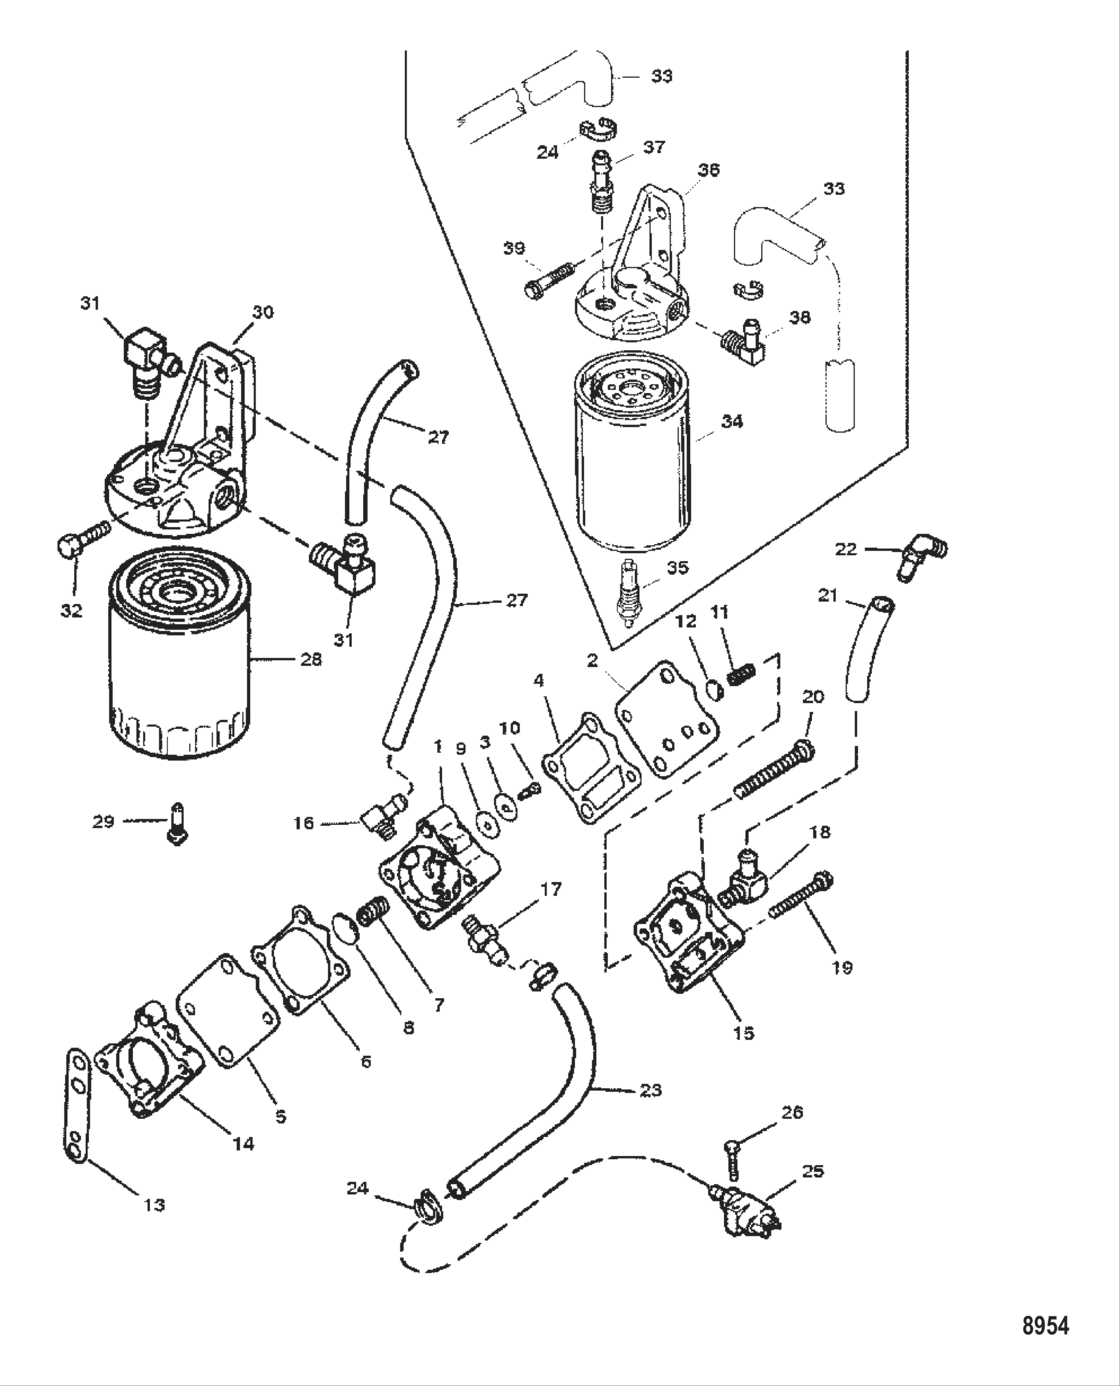 Fuel Pump (Plastic Body With Loose Fittings)